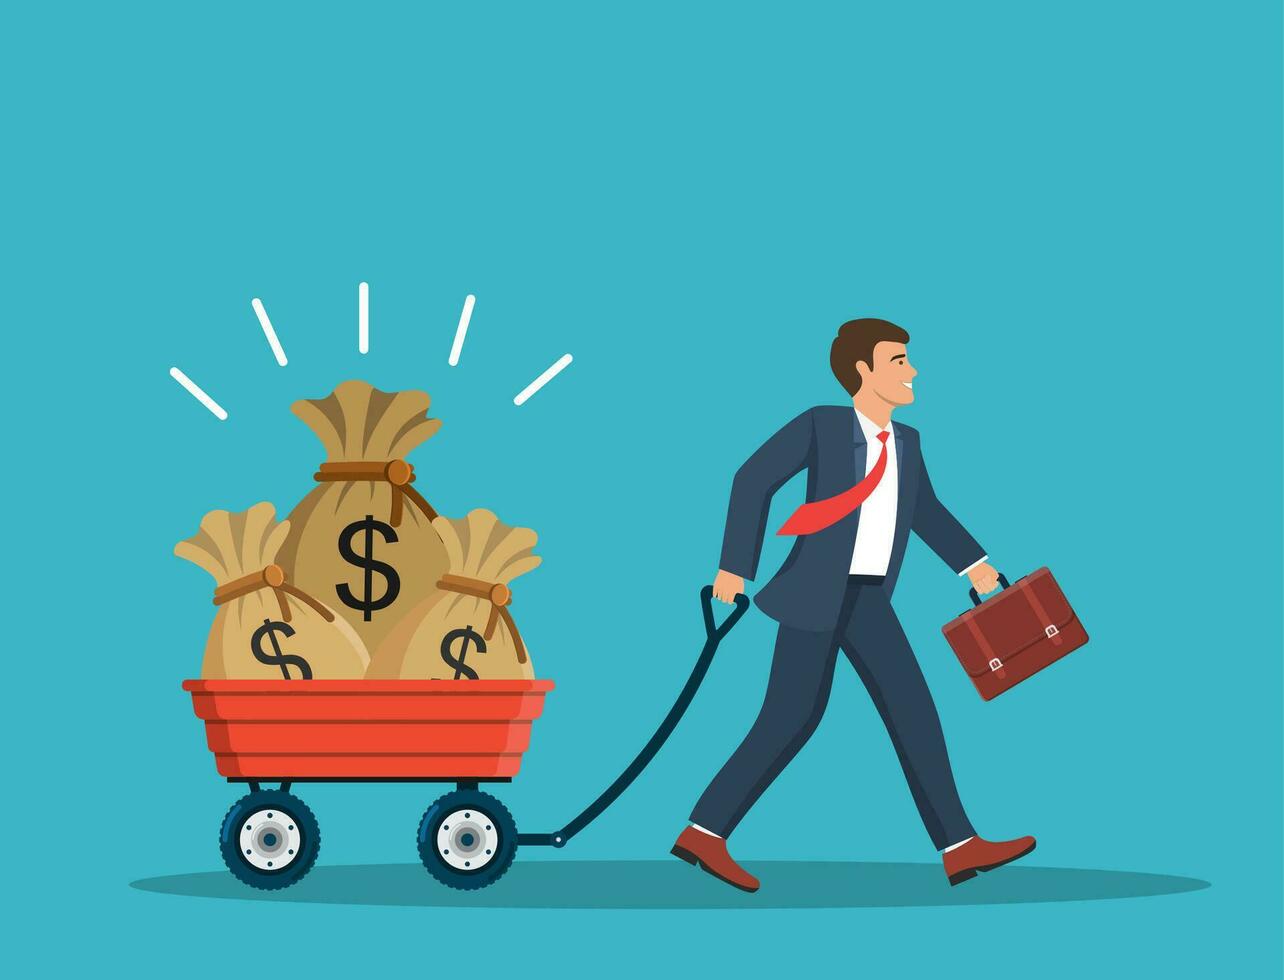 Happy businessman pulling cart full of money. Business and finance concept. Vector illustration in flat style